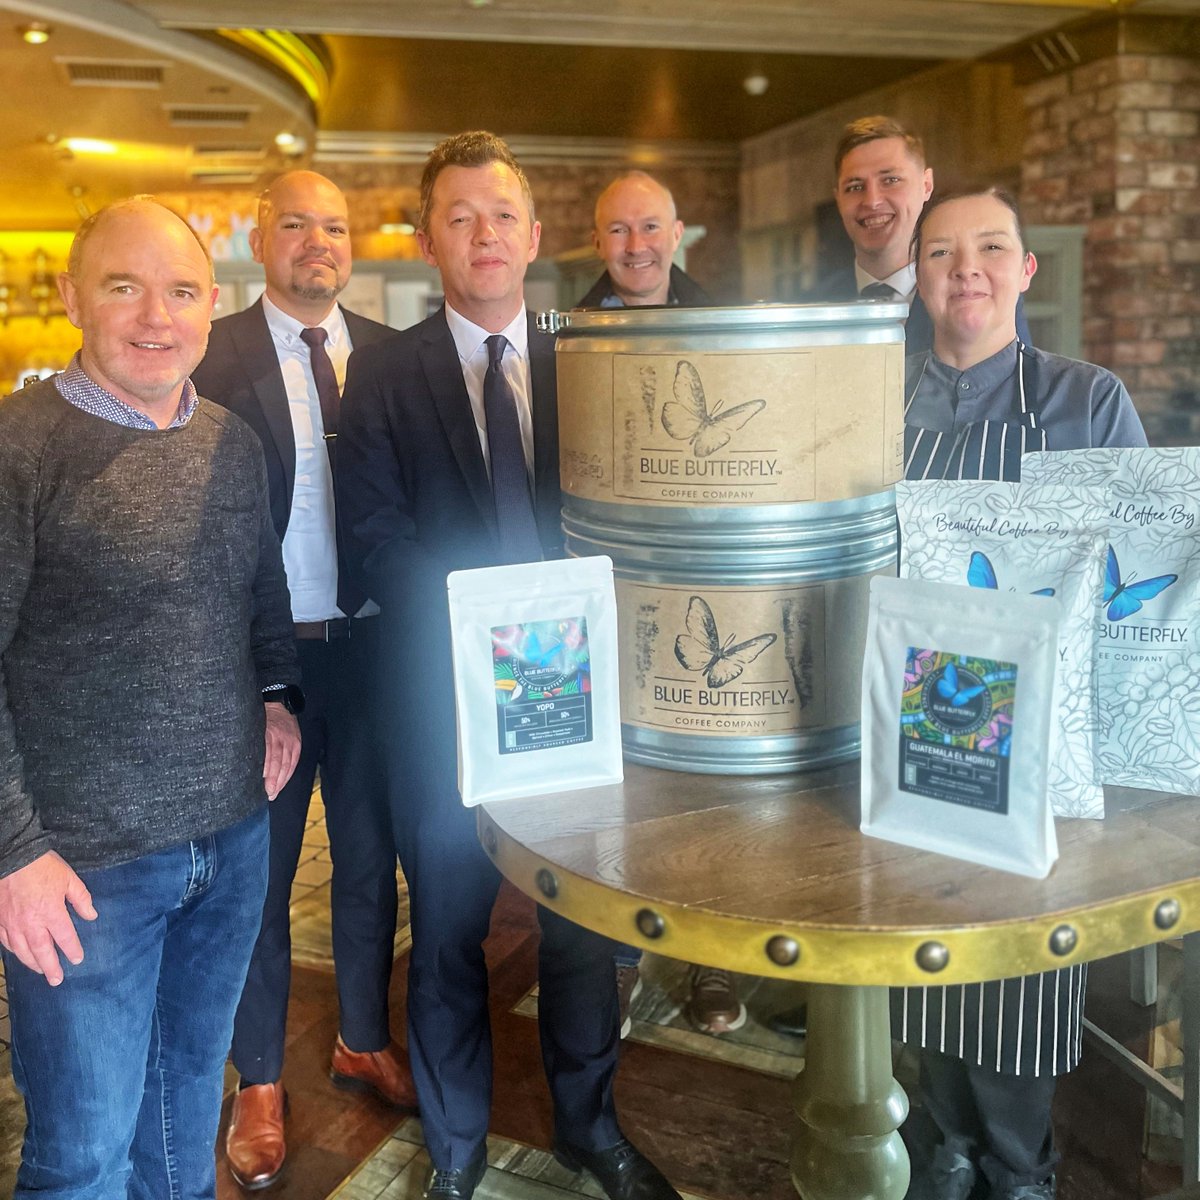 Delighted to kickstart our partnership with Blue Butterfly as our new coffee provider @ Kayne's, Dromhall & Randles. We had Fintan & Paul in to help us sample the wonderful tastes & blends this week #coffeelover #coffee #fairtrade #bluebutterfly #sustainability #kaynes #killarney